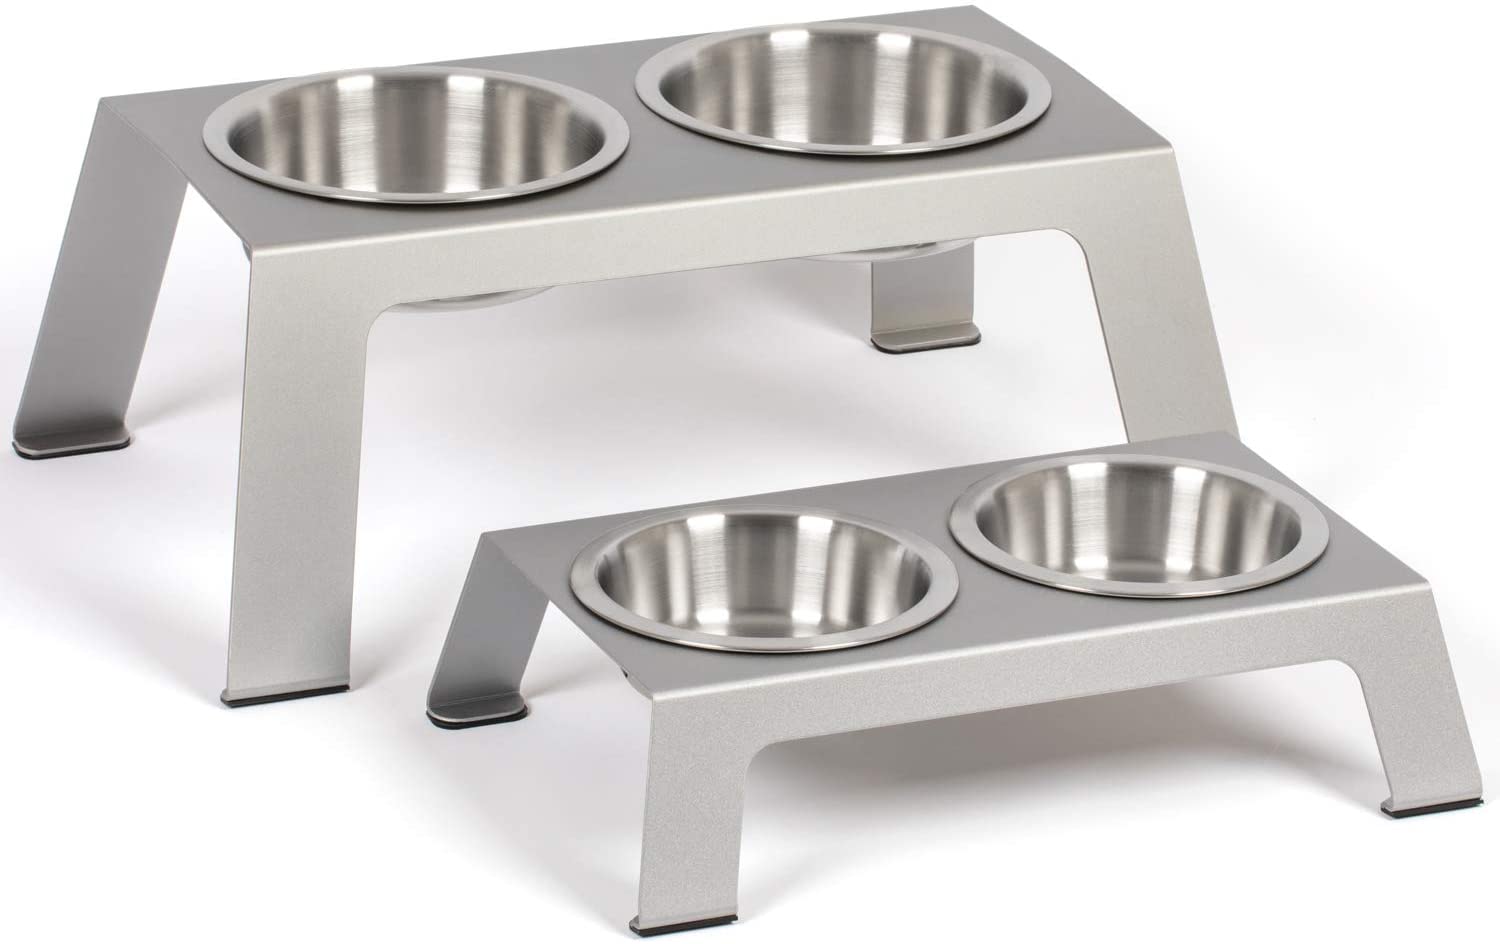 Dog Bowl Double Dog Cat Bowl Premium Stainless Steel Water and Food Raised  Bowls, Pet Feeder Bowls Set with Non-Slip Resin Station for Small Medium